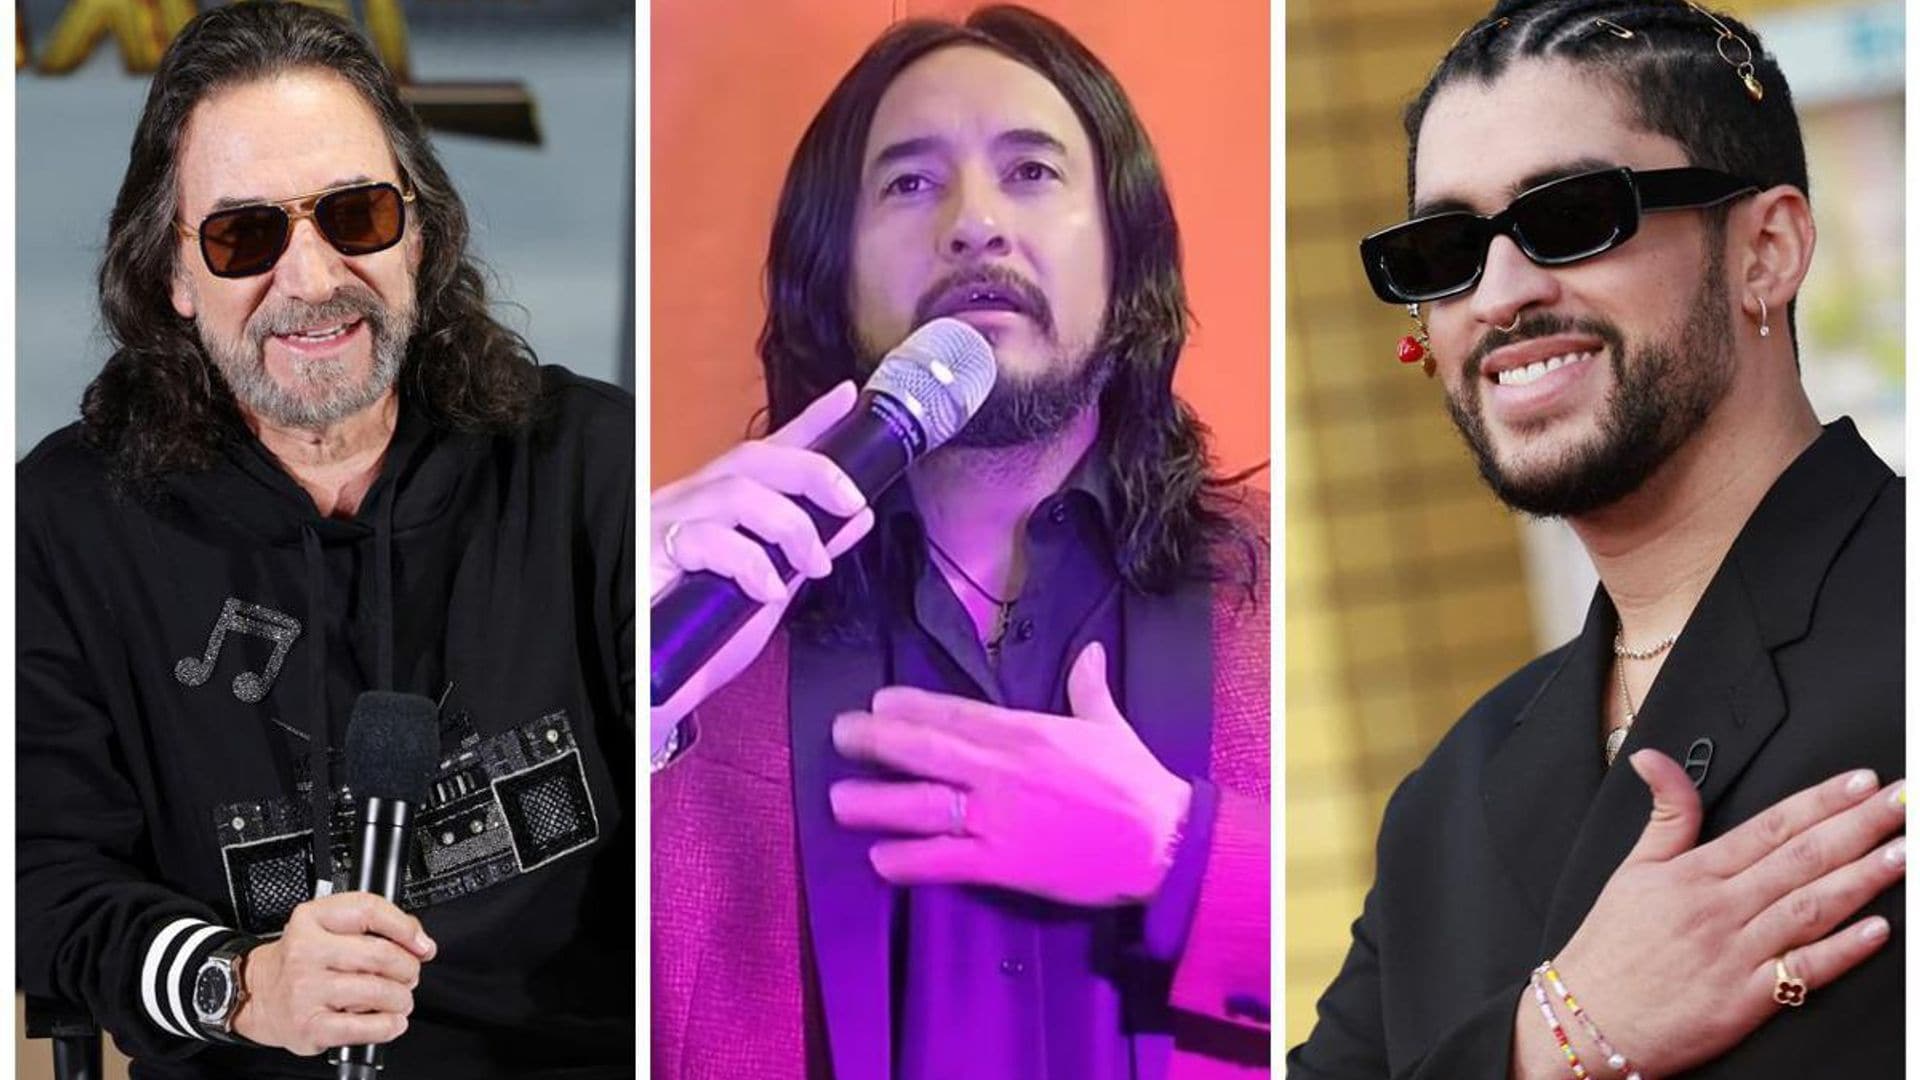 Meet the Marco Antonio Solís imitator covering Bad Bunny songs with recognizable classic melodies